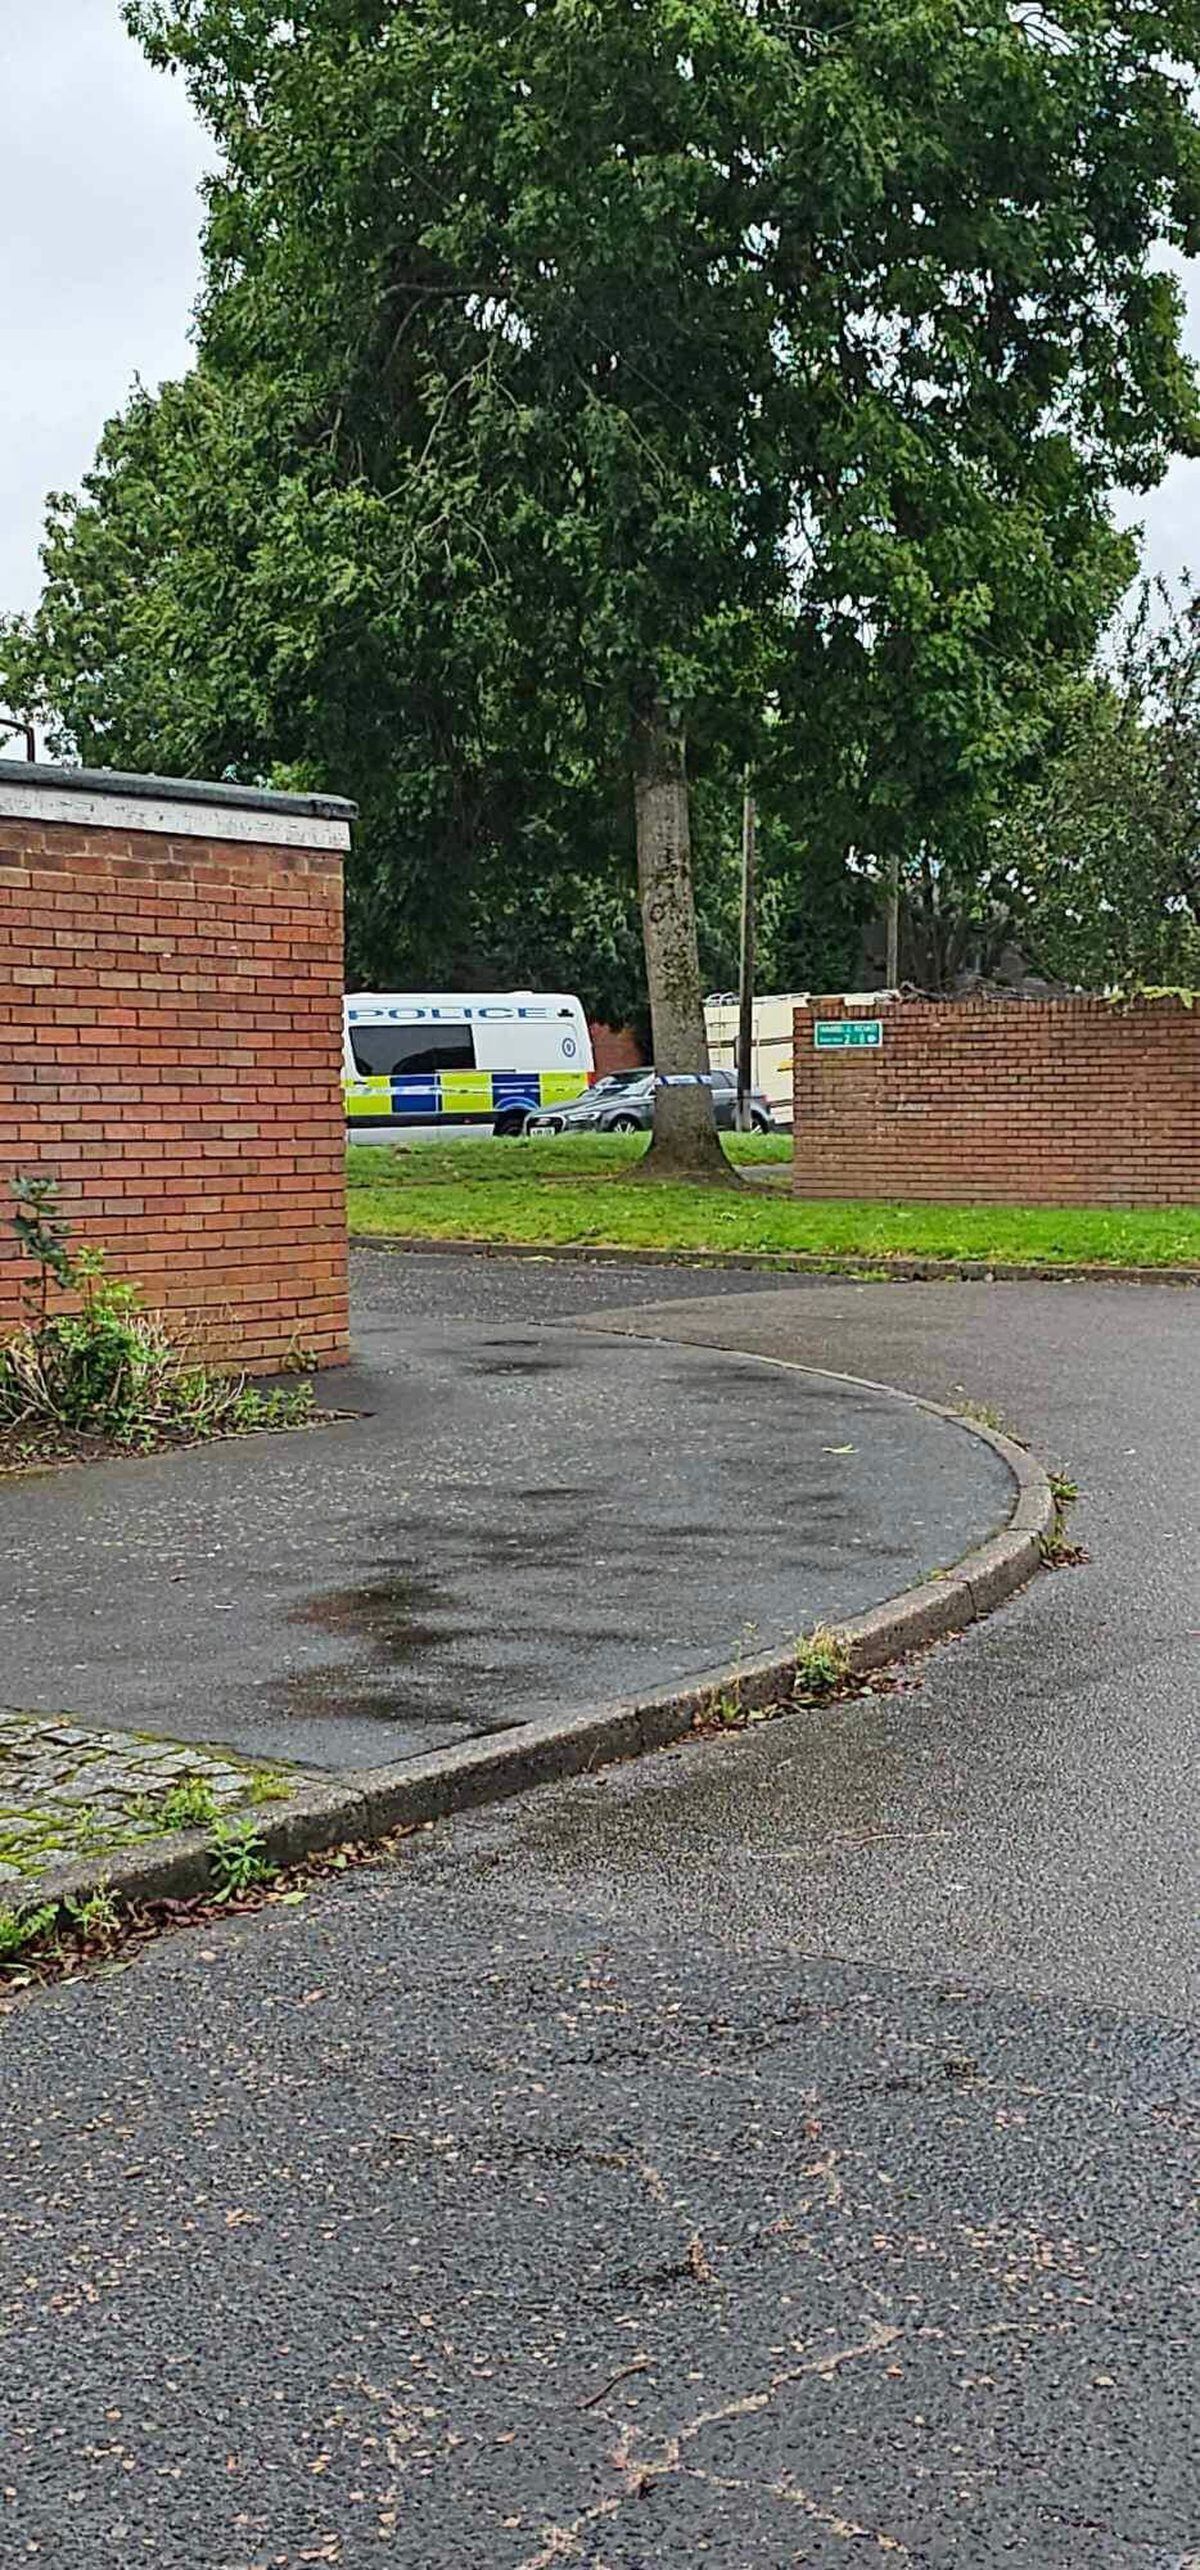 Roads in the Merry Hill area of Wolverhampton have been sealed off while police work at the scene